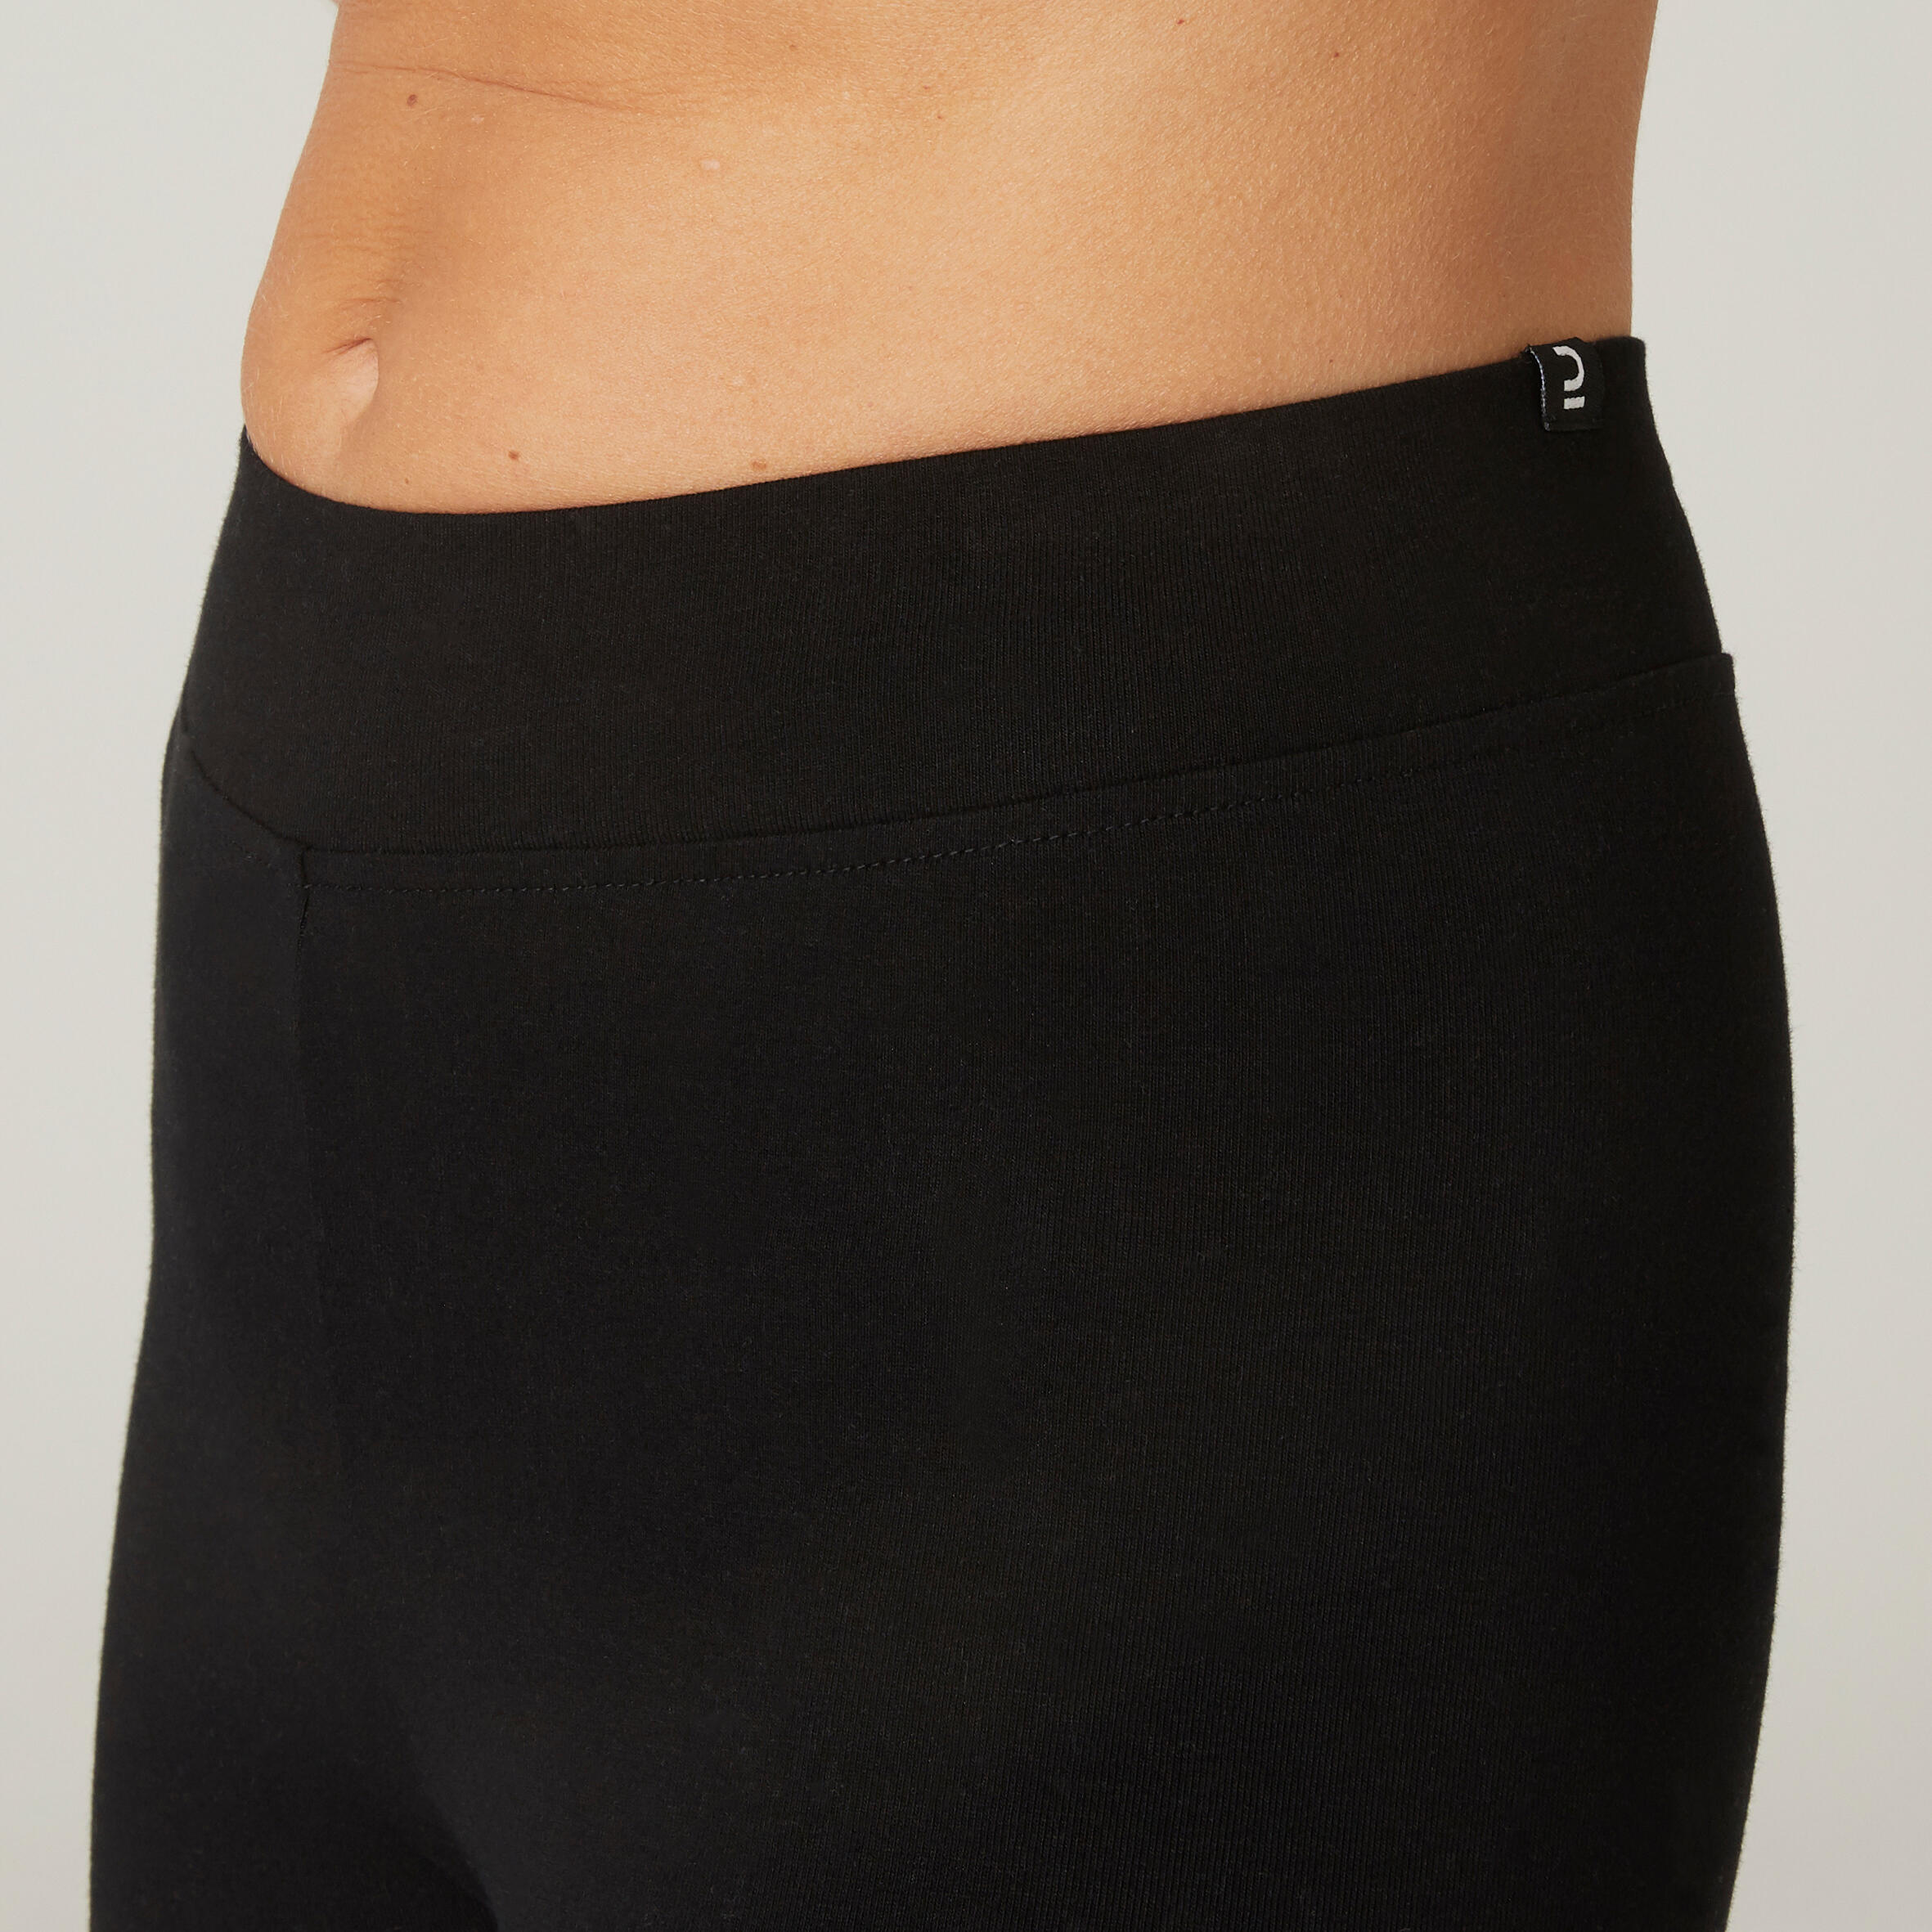 Women's Slim-Fit Fitness Cropped Bottoms 500 - Black 4/6